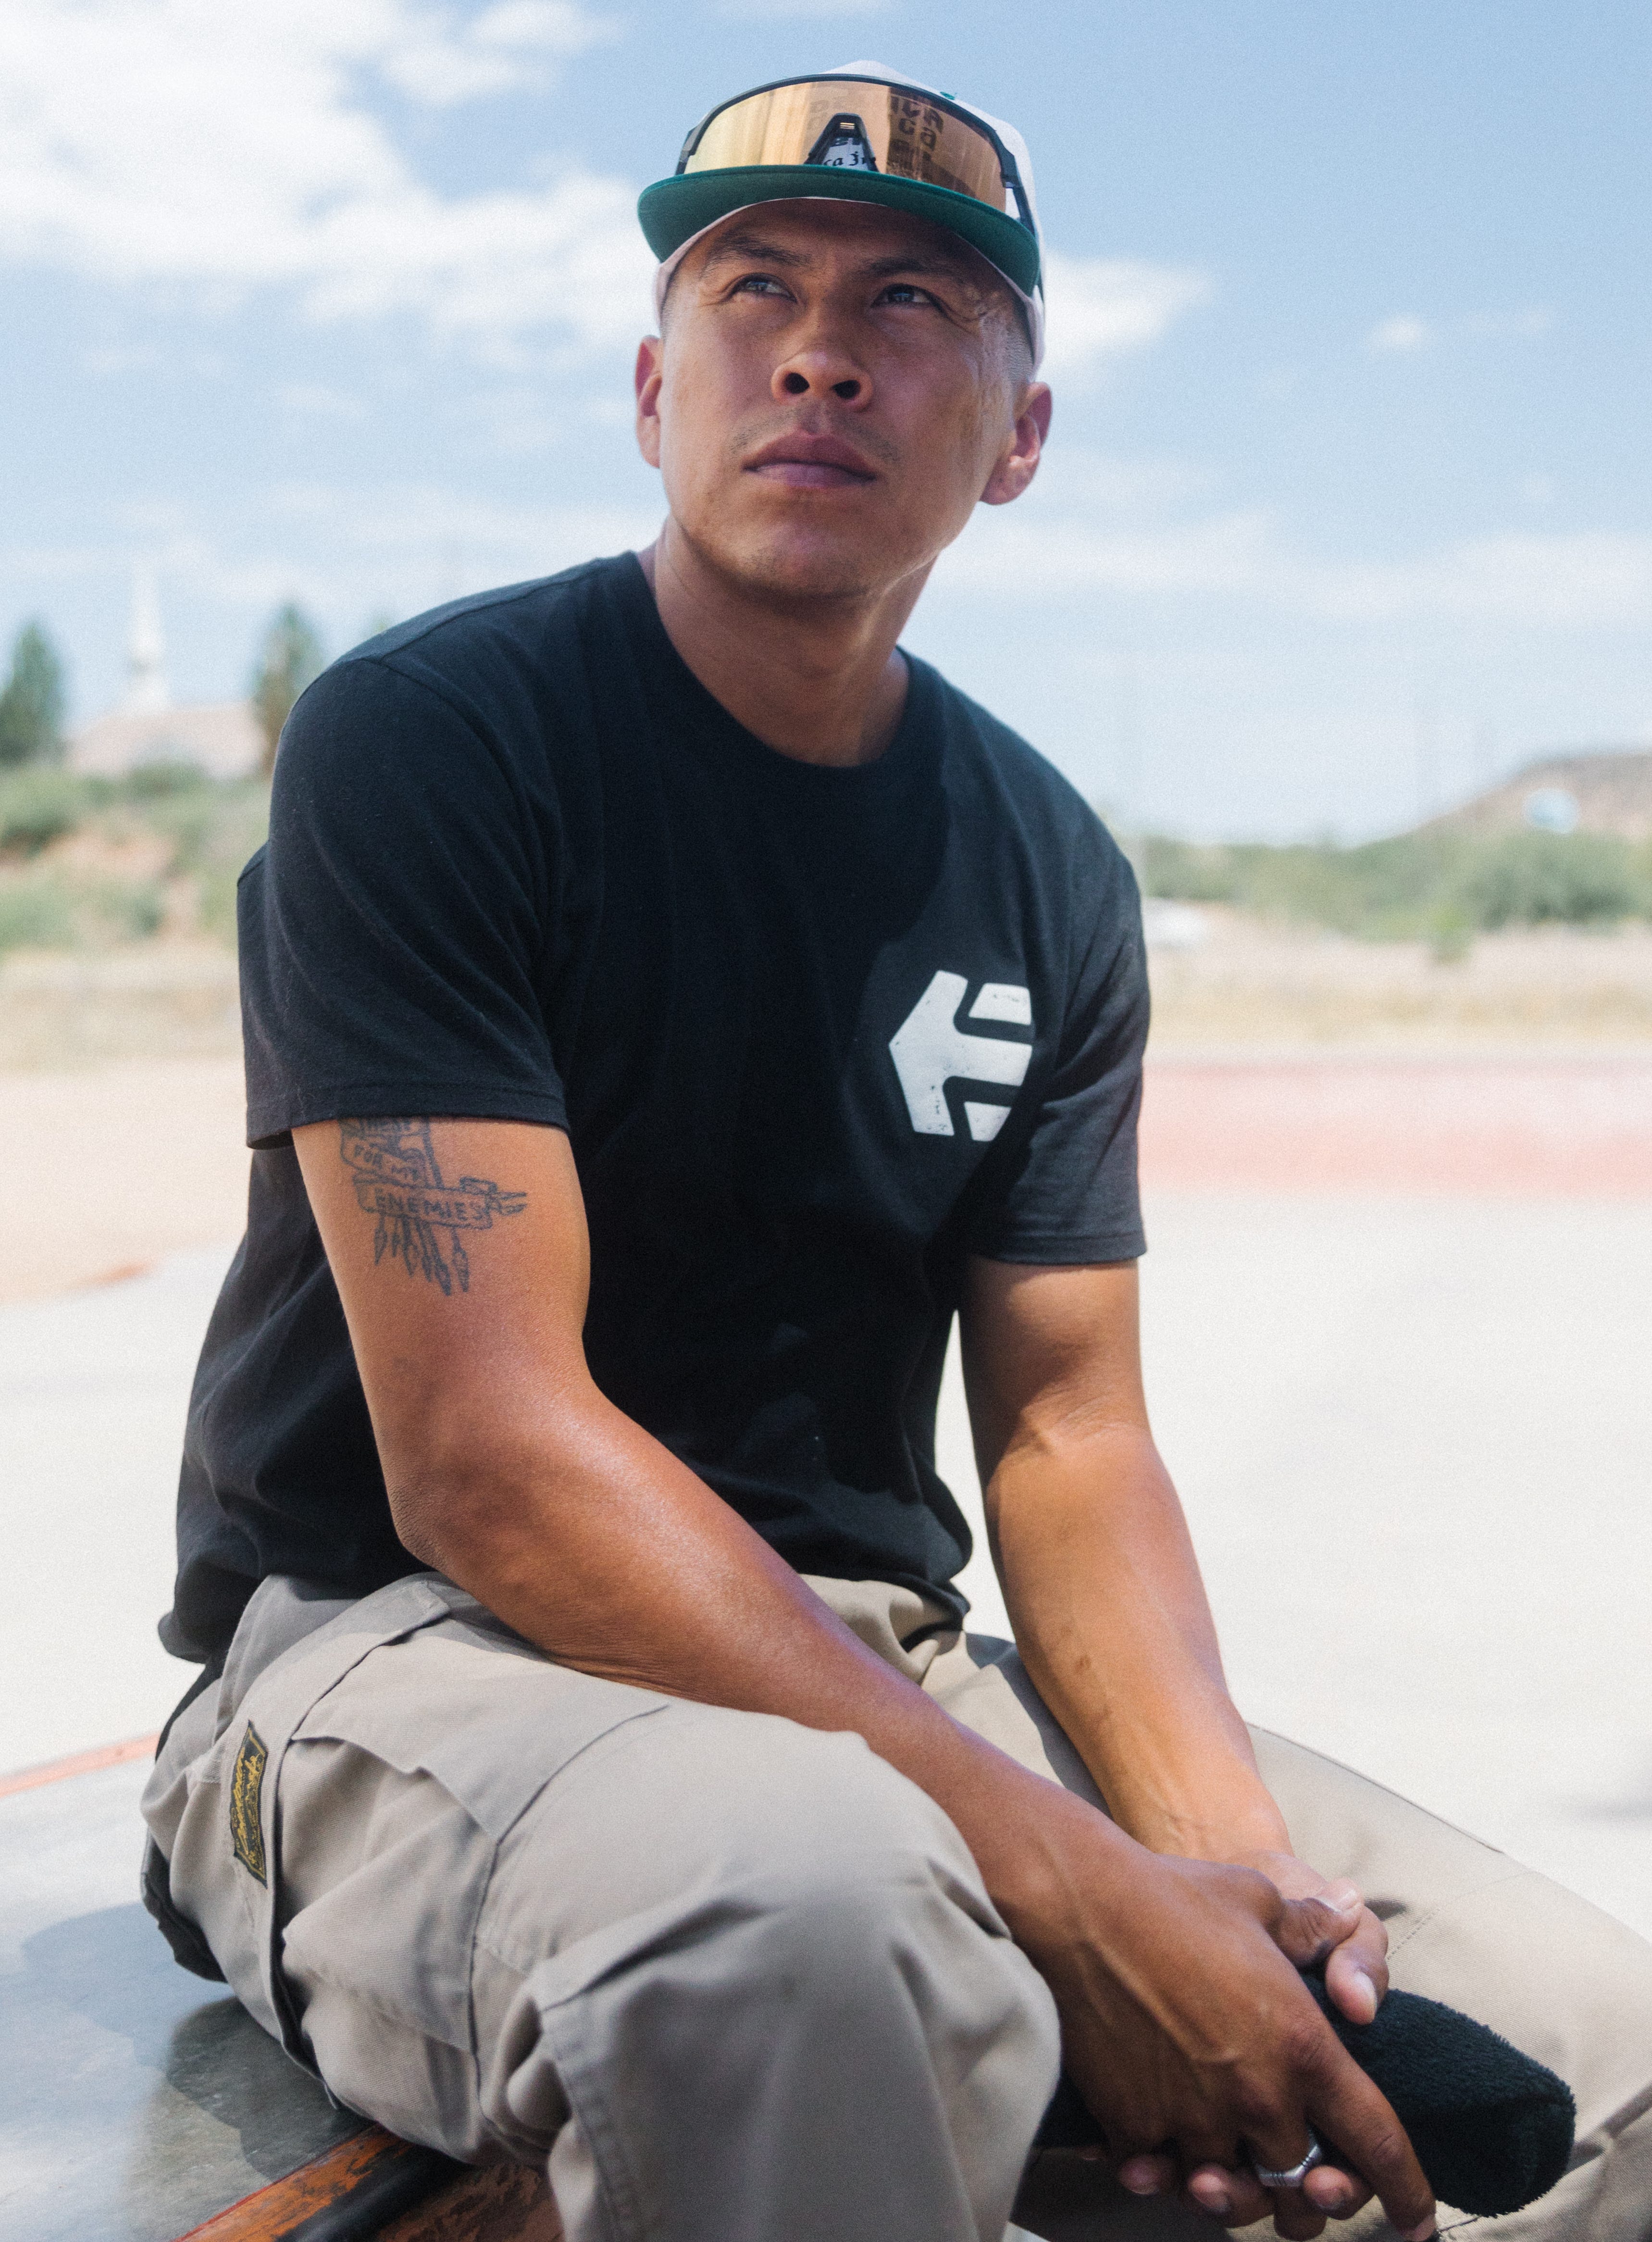 Douglas Miles Jr. watches young skaters at the new San Carlos Apache skate park on the San Carlos Reservation east of Globe on July 13, 2022.